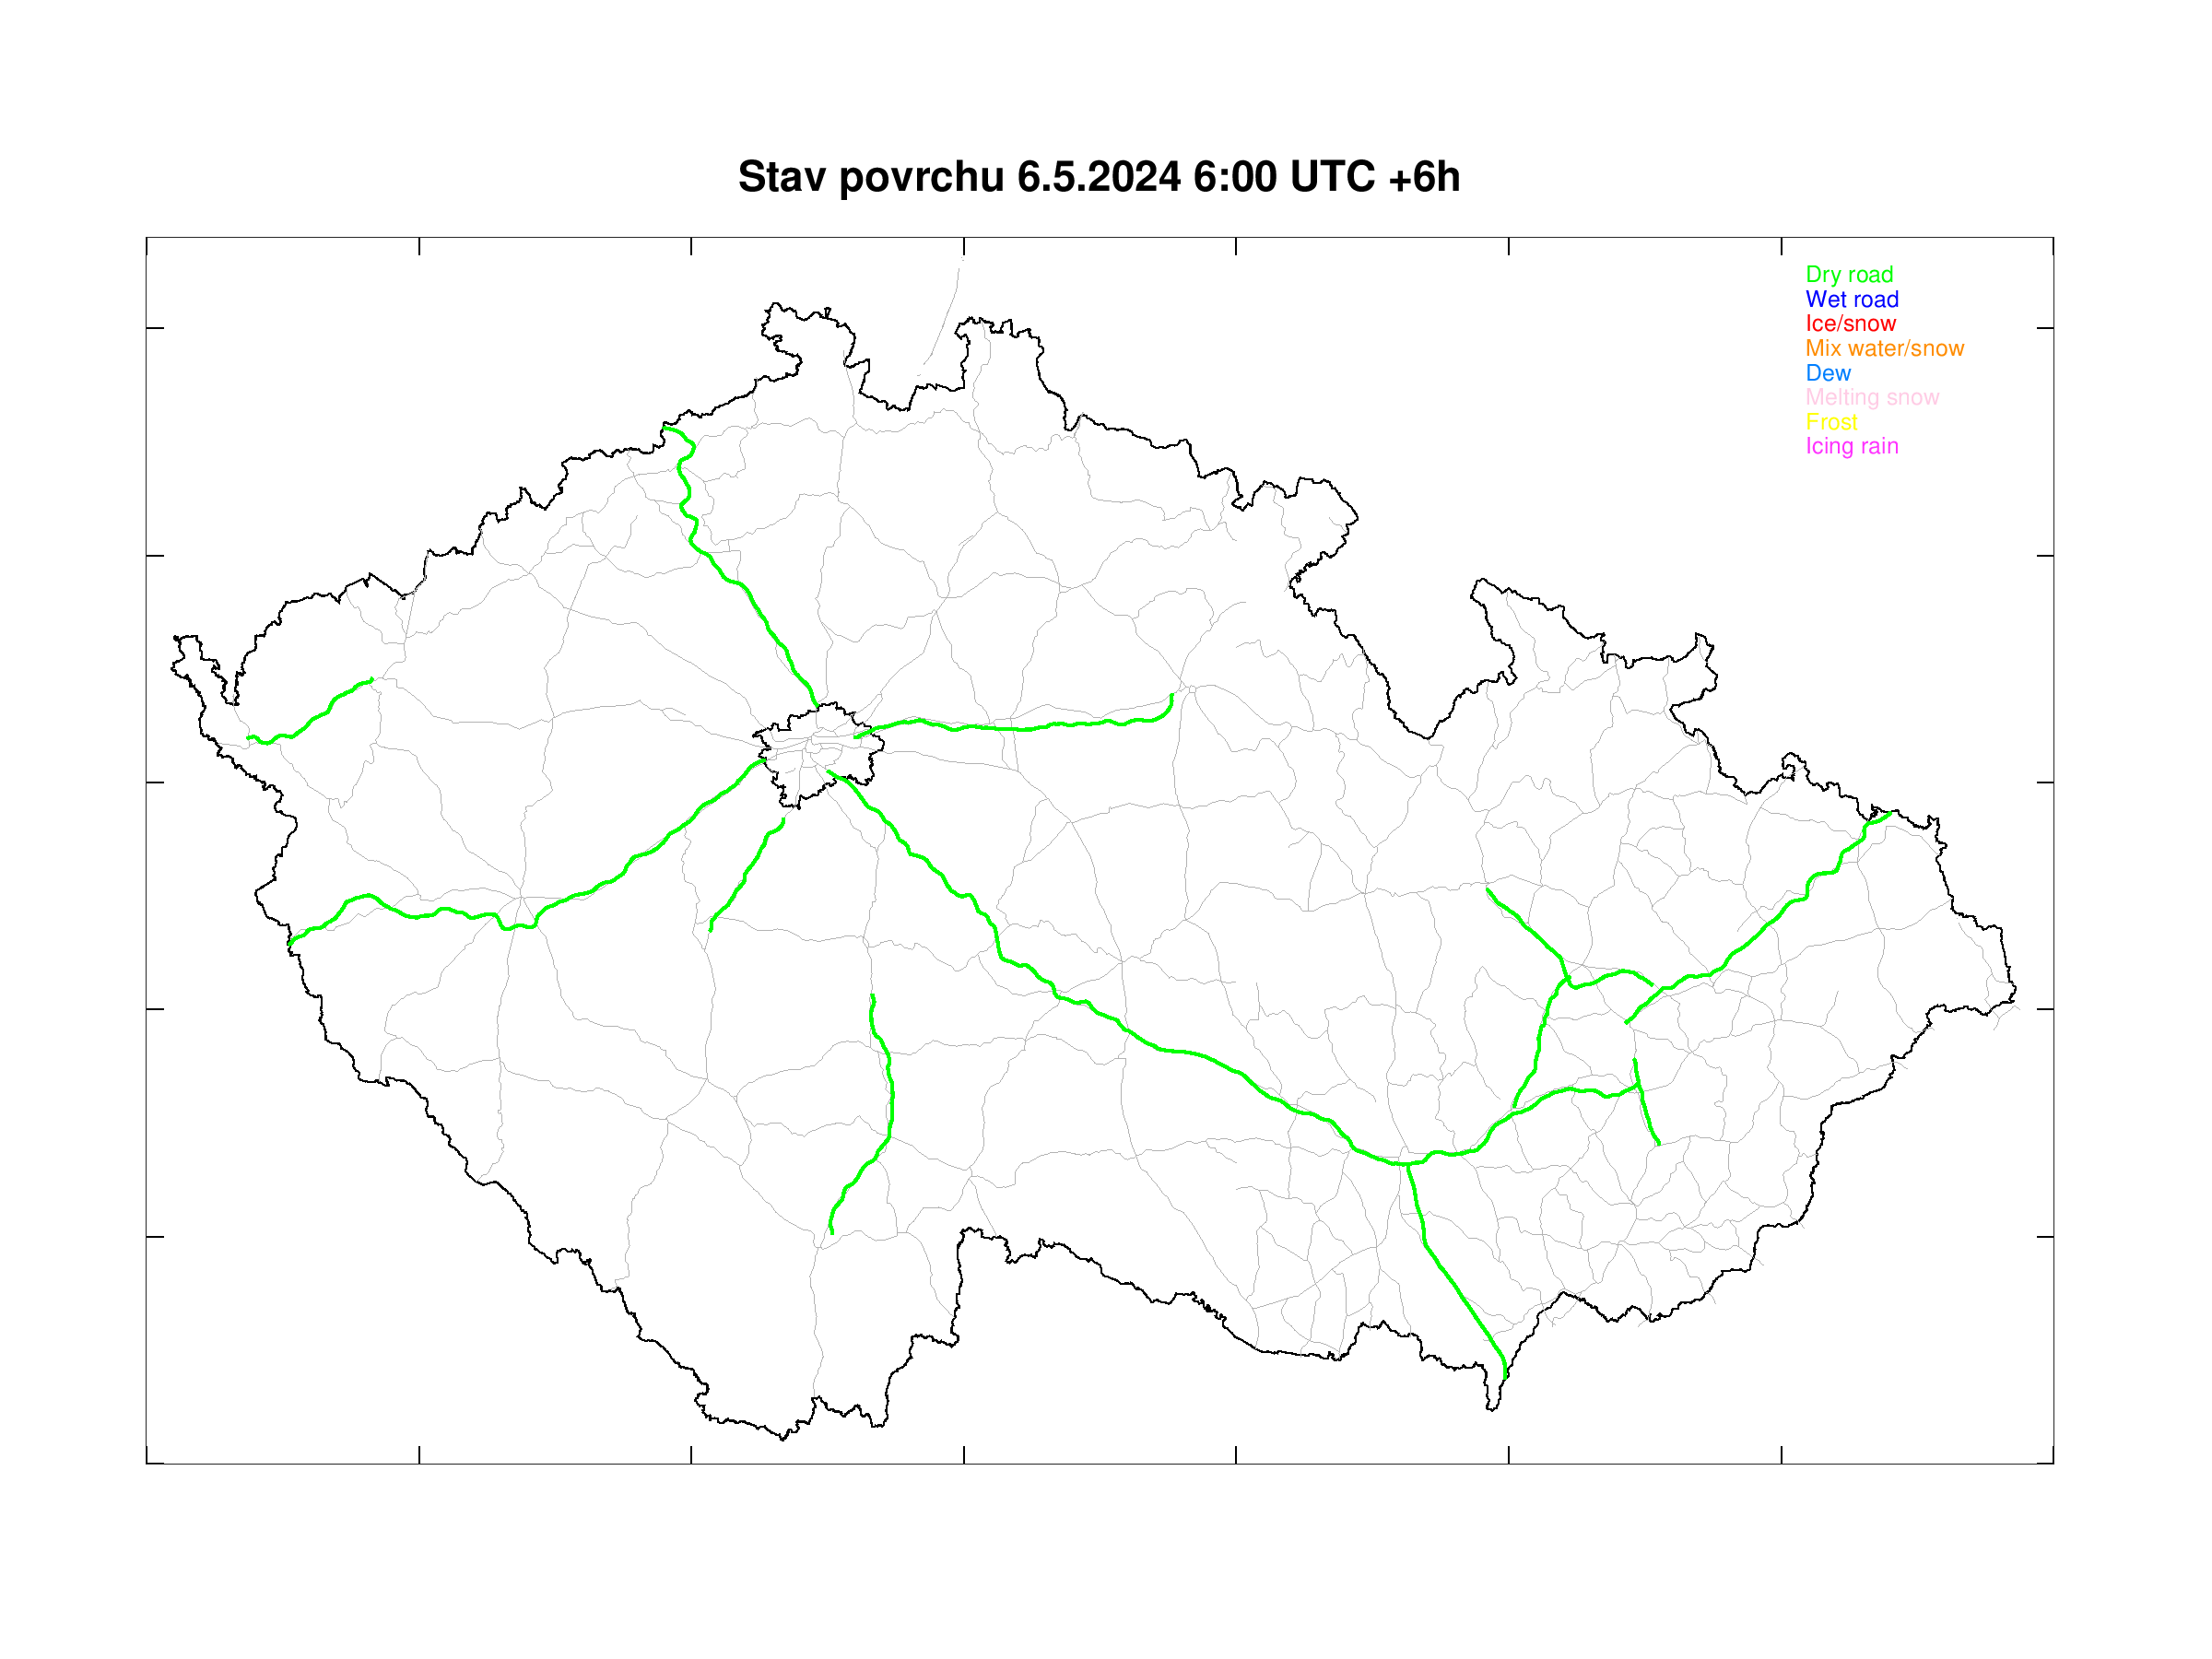 Road surface condition forecast for Czech highways +6h